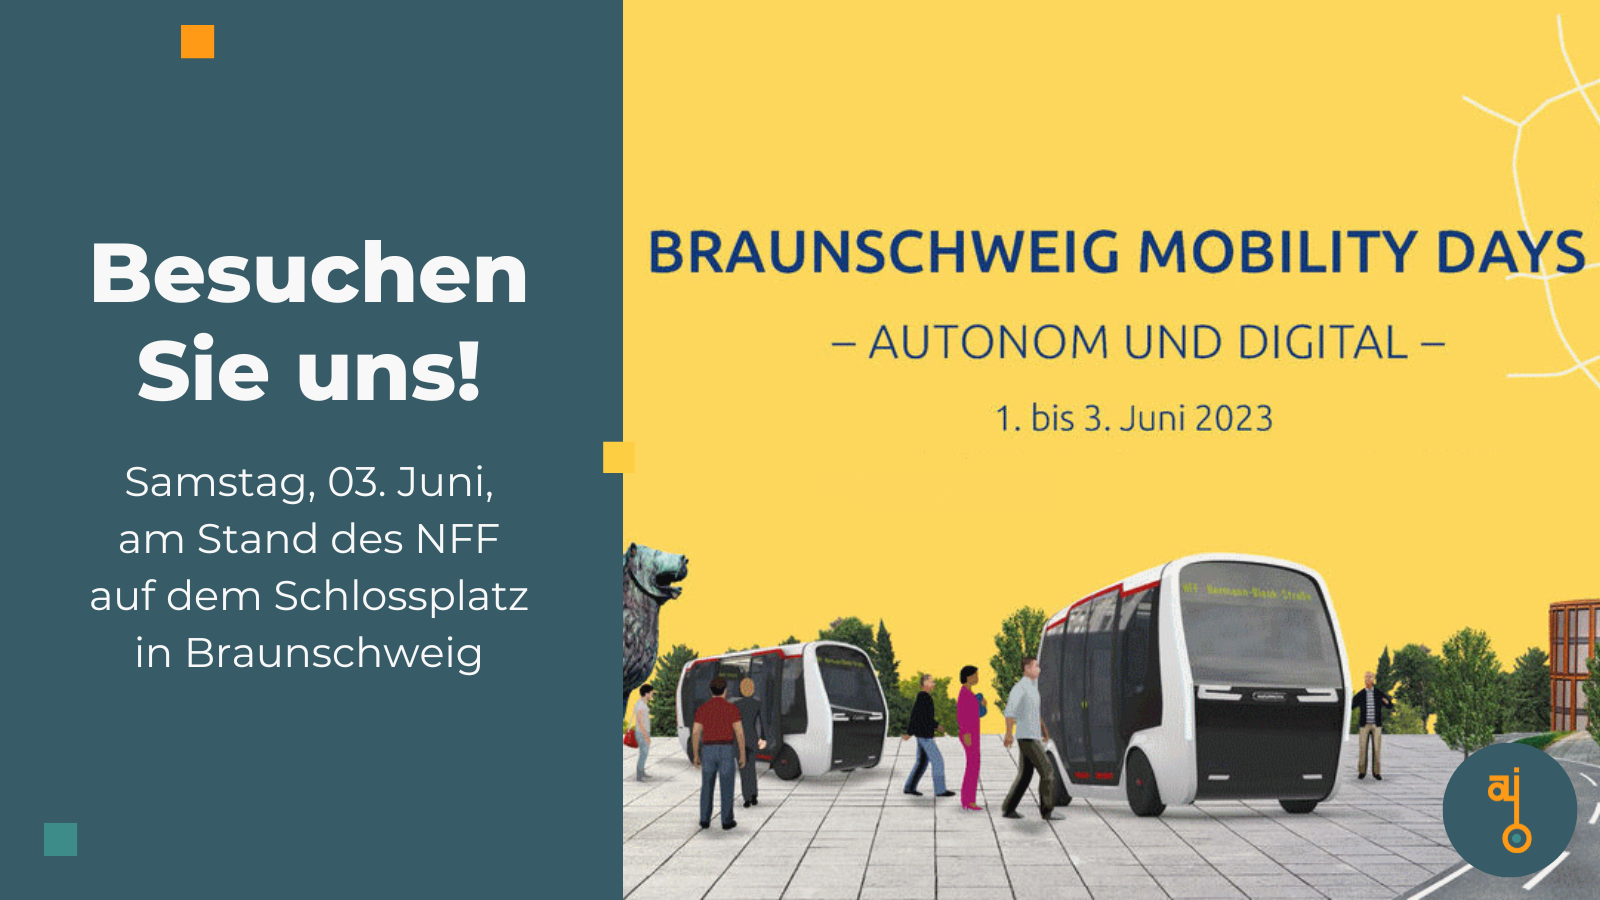 Info picture for the Braunschweig Mobility Days in green and yellow